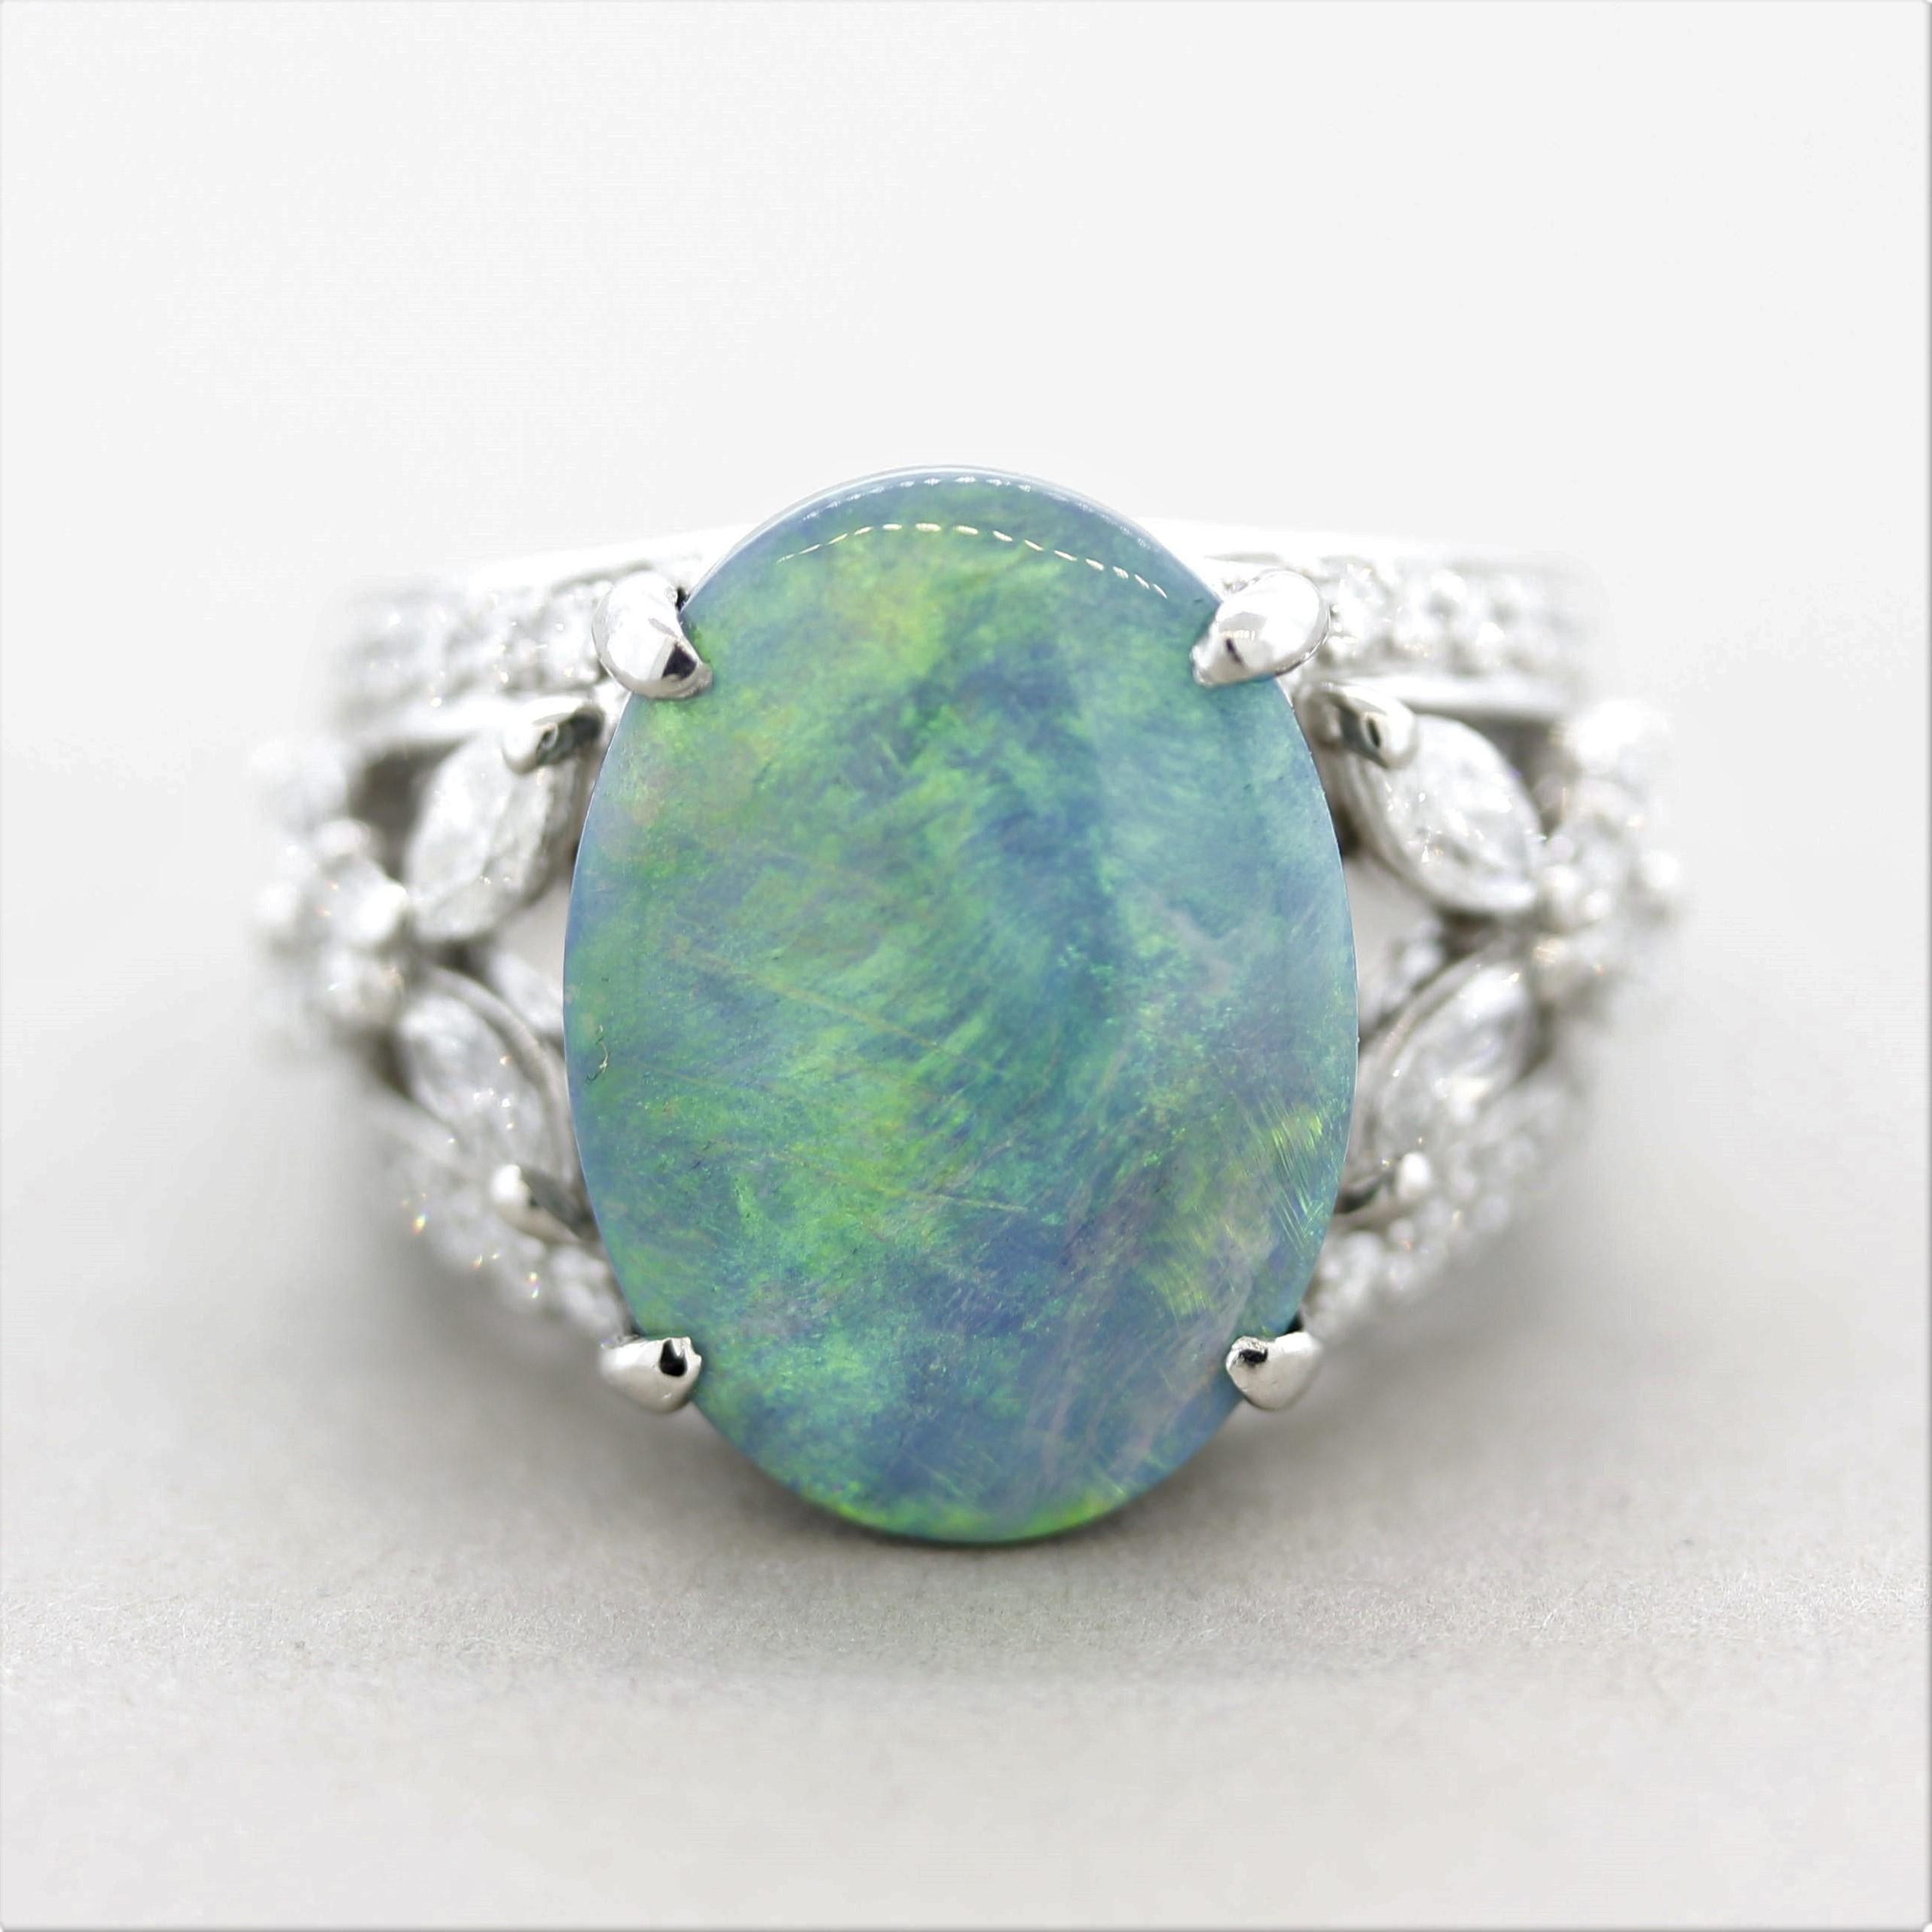 A large and impressive Australian black opal ring! The opal weighs 6.32 carats and has excellent play-of-color as bright flashes of colors can be seen across the stone. Predominantly greens with yellows, blues, and orangy-reds. It is accented by